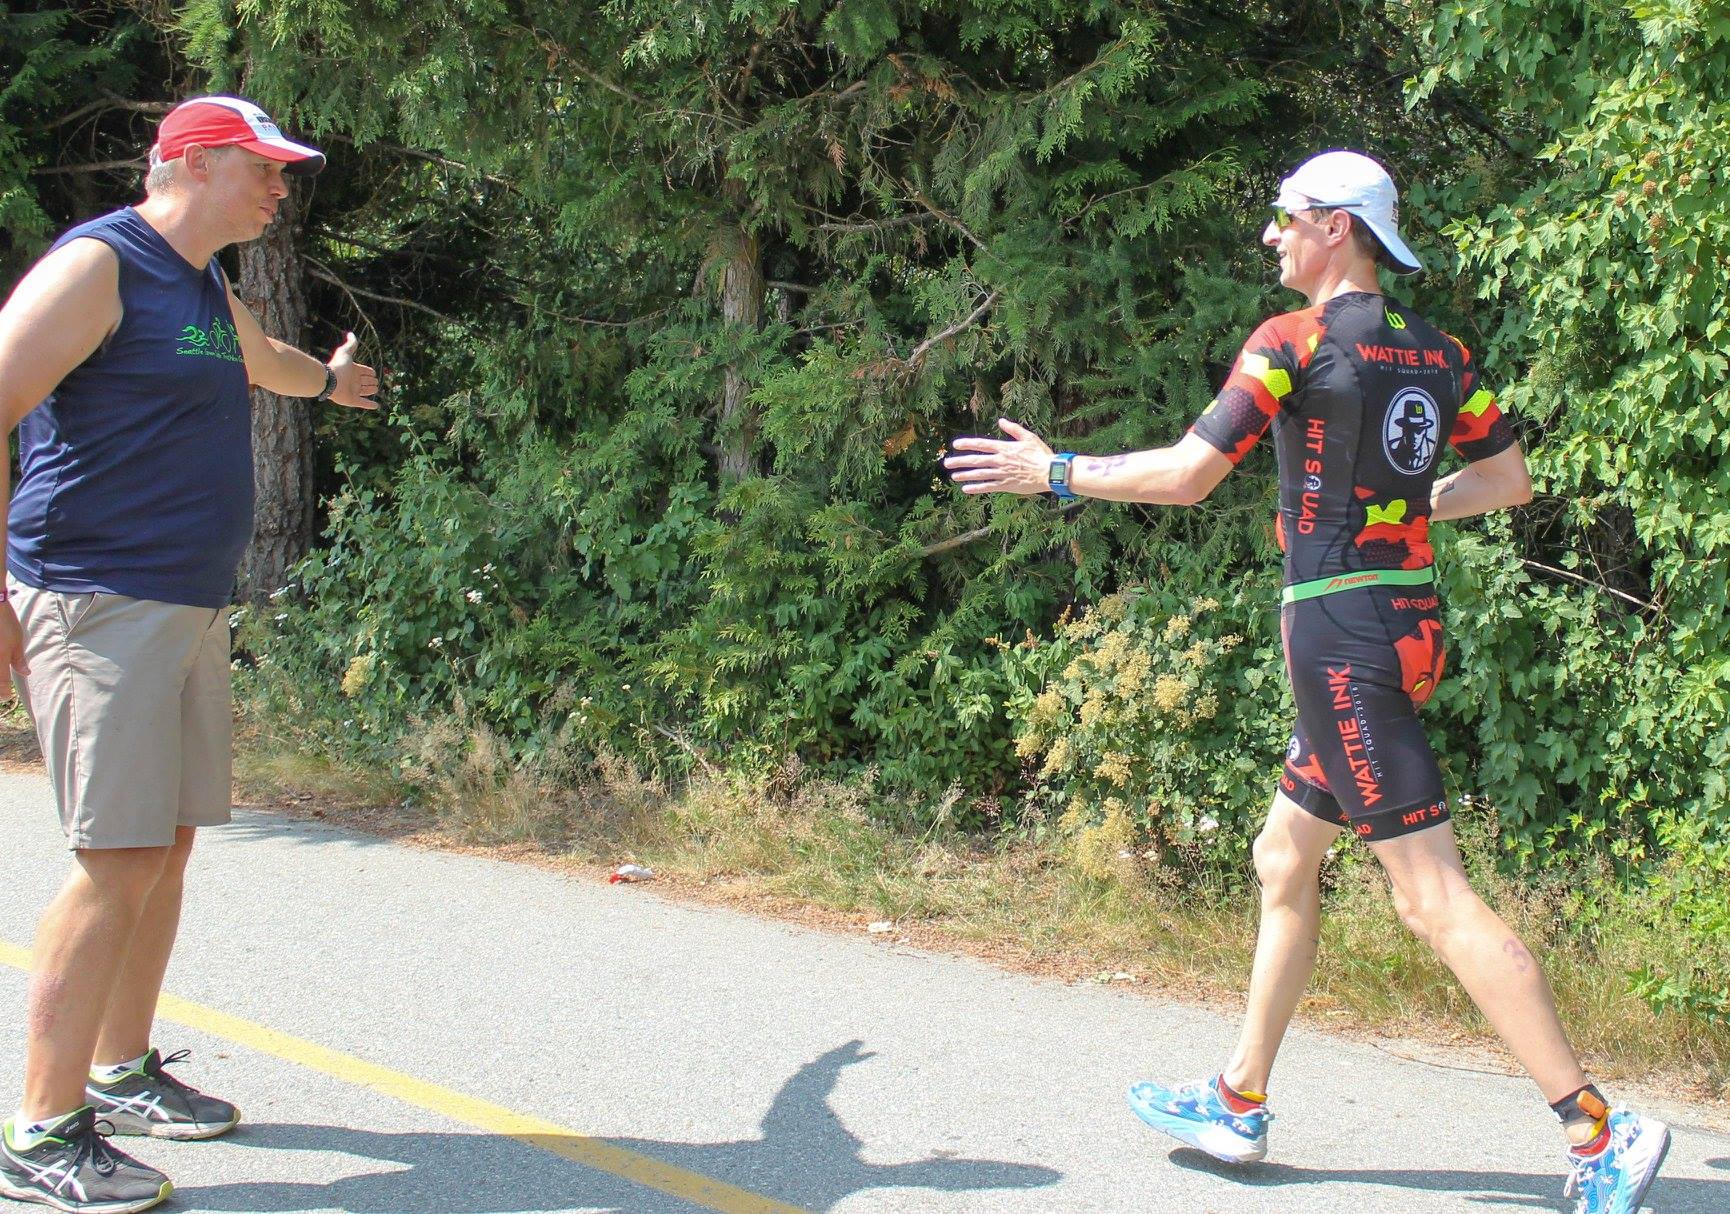 Coach_Terry_Wilson_Pursuit_of_The_Perfect_Race_IRONMAN_Canada_70.3_Roy_McBeth_Olympic_Rings_Wattie_Hit_Squad_3.jpg